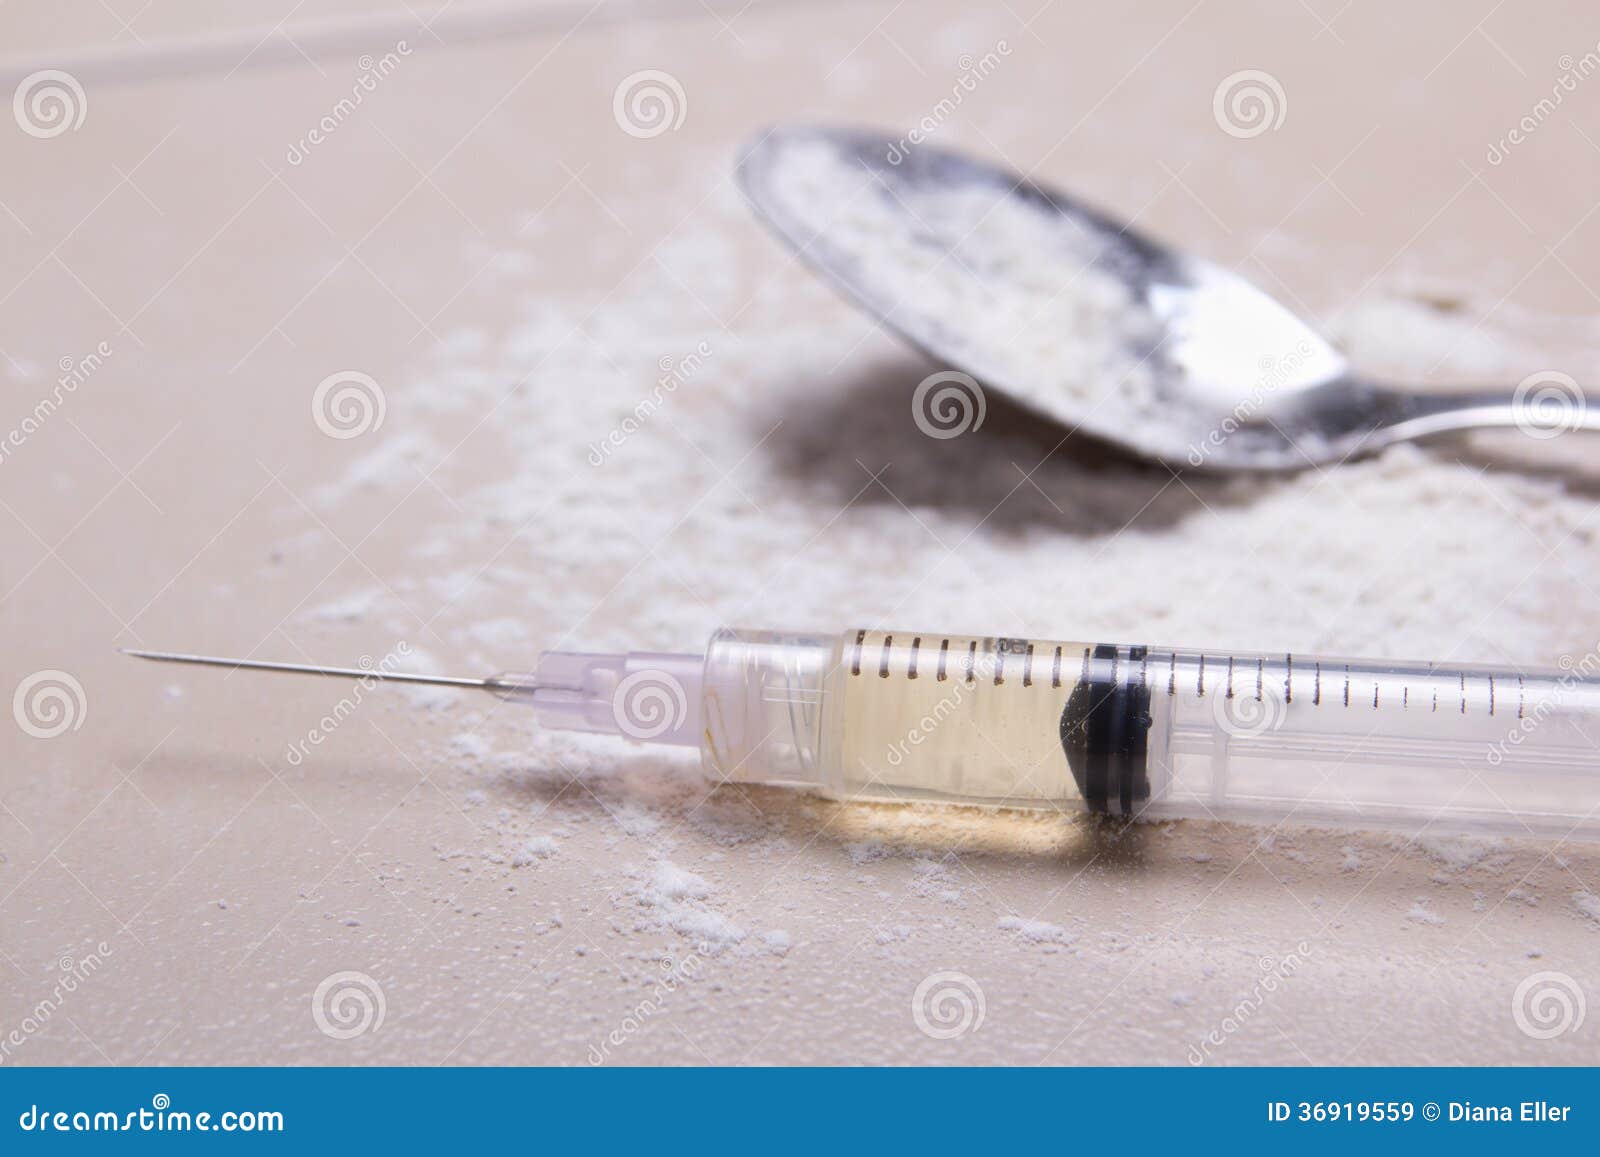 Syringe With Drug Substance, Heroin Powder And Spoon On ...